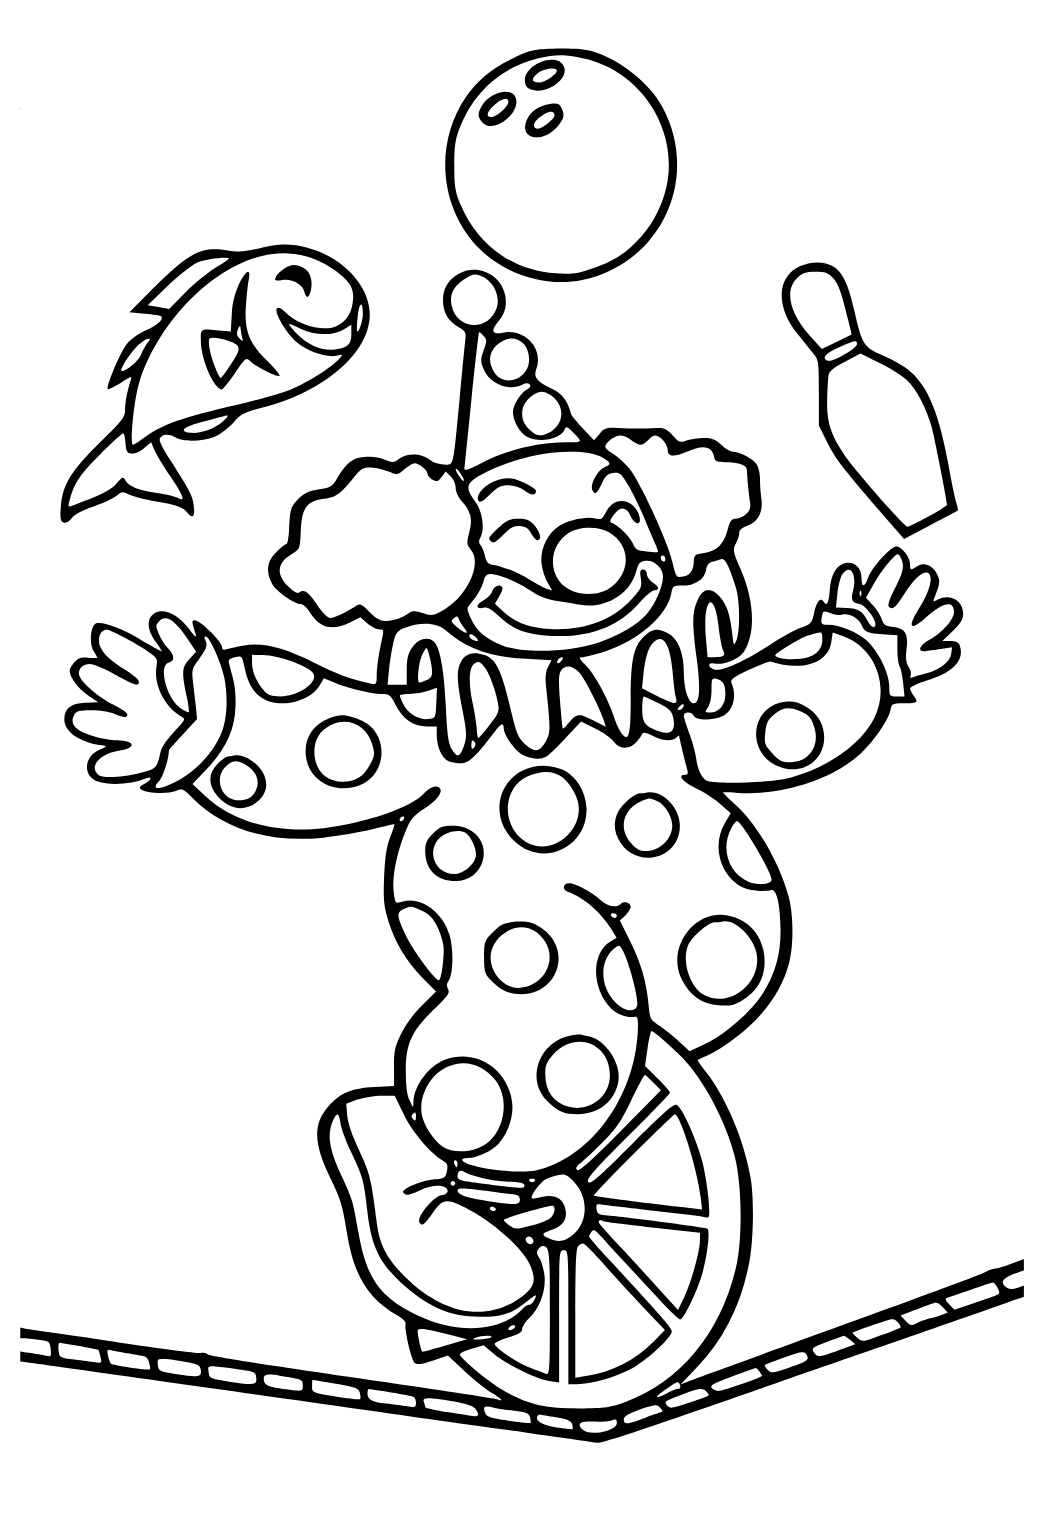 Free printable circus clown coloring page for adults and kids